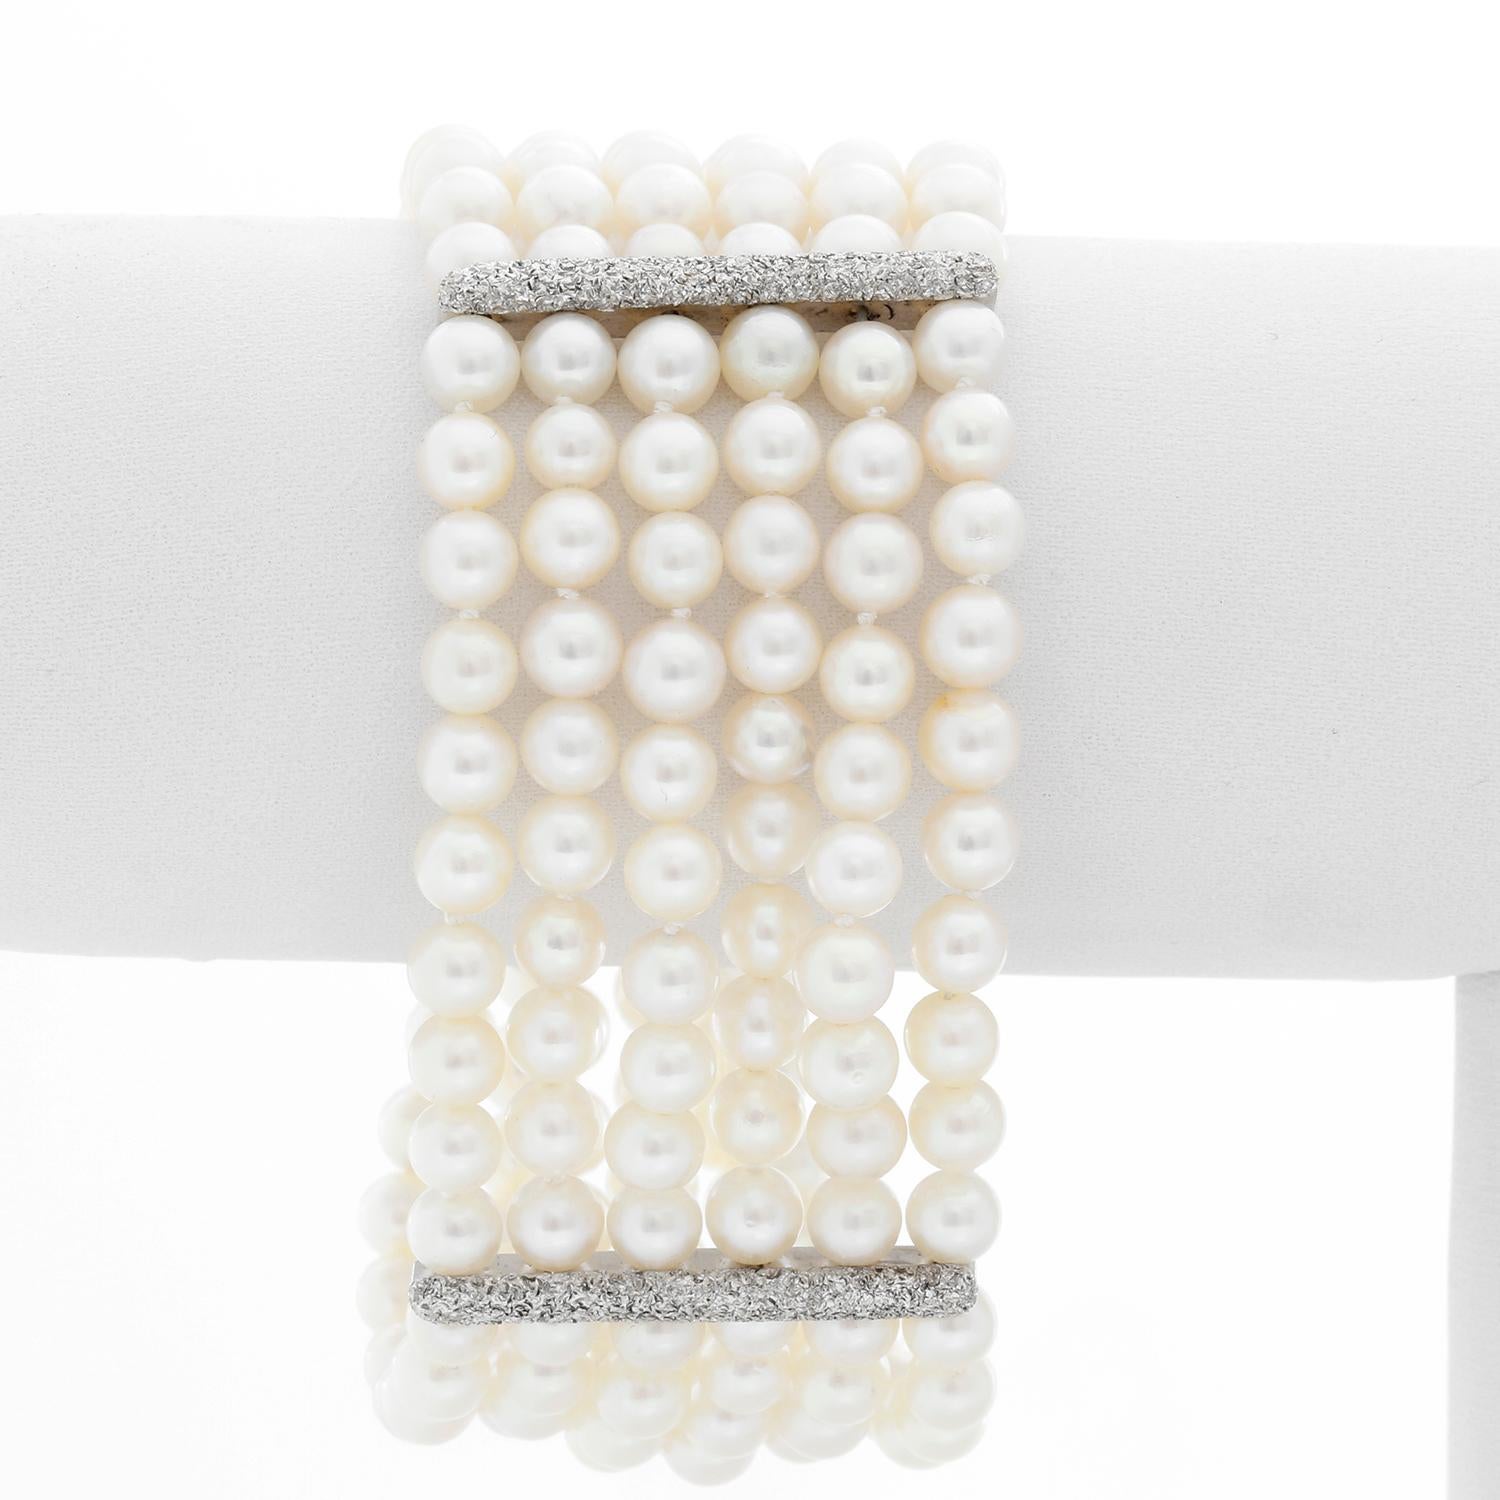 Six Strand Pearl and Diamond Bracelet - Just a little over 7 inches and 1.5 inches wide. The clasp is a beautiful leaf set in diamonds weighing approx 4 cts. This bracelet would make the ideal compliment to a bridal gown, but can also be worn for